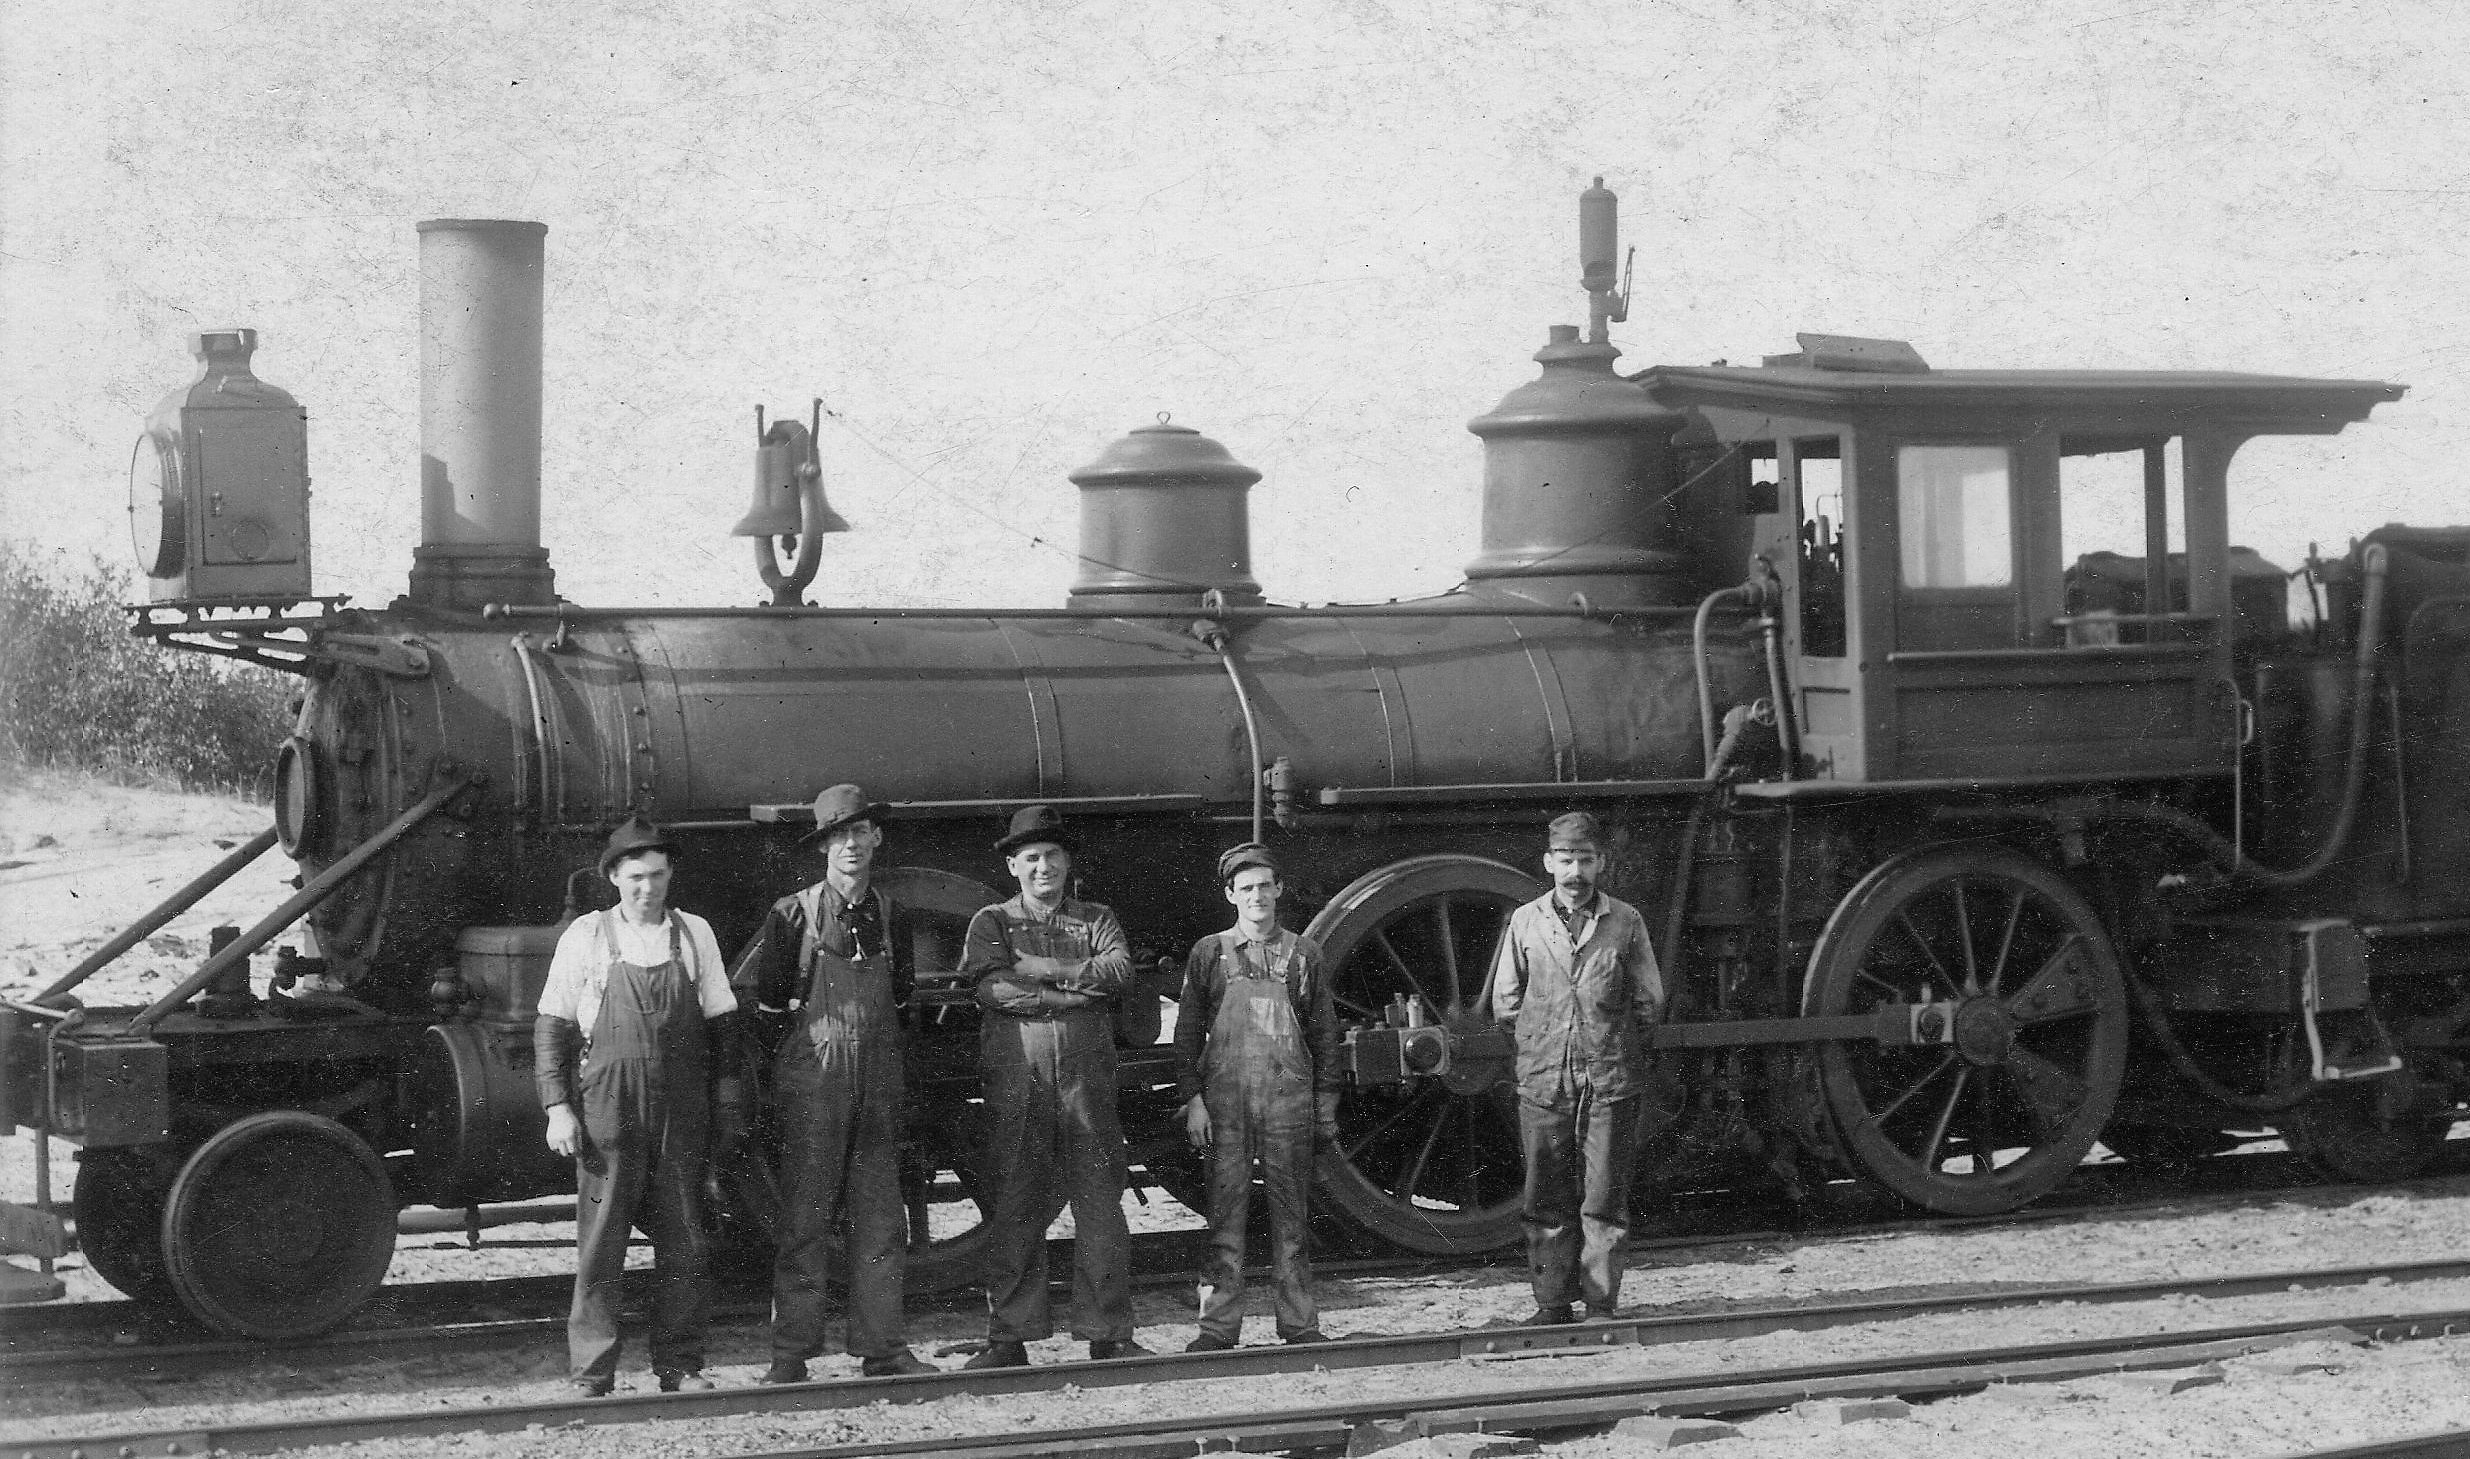 1912 photo of Haywire Locomotive No. 4 and Crew.  Left to Right: Amiel Anderson, Frank Walker, Jack Larien, Edward Labelle (Engineer) and Lavern Niles (Fireman). Niles/Helmka Family Collection.